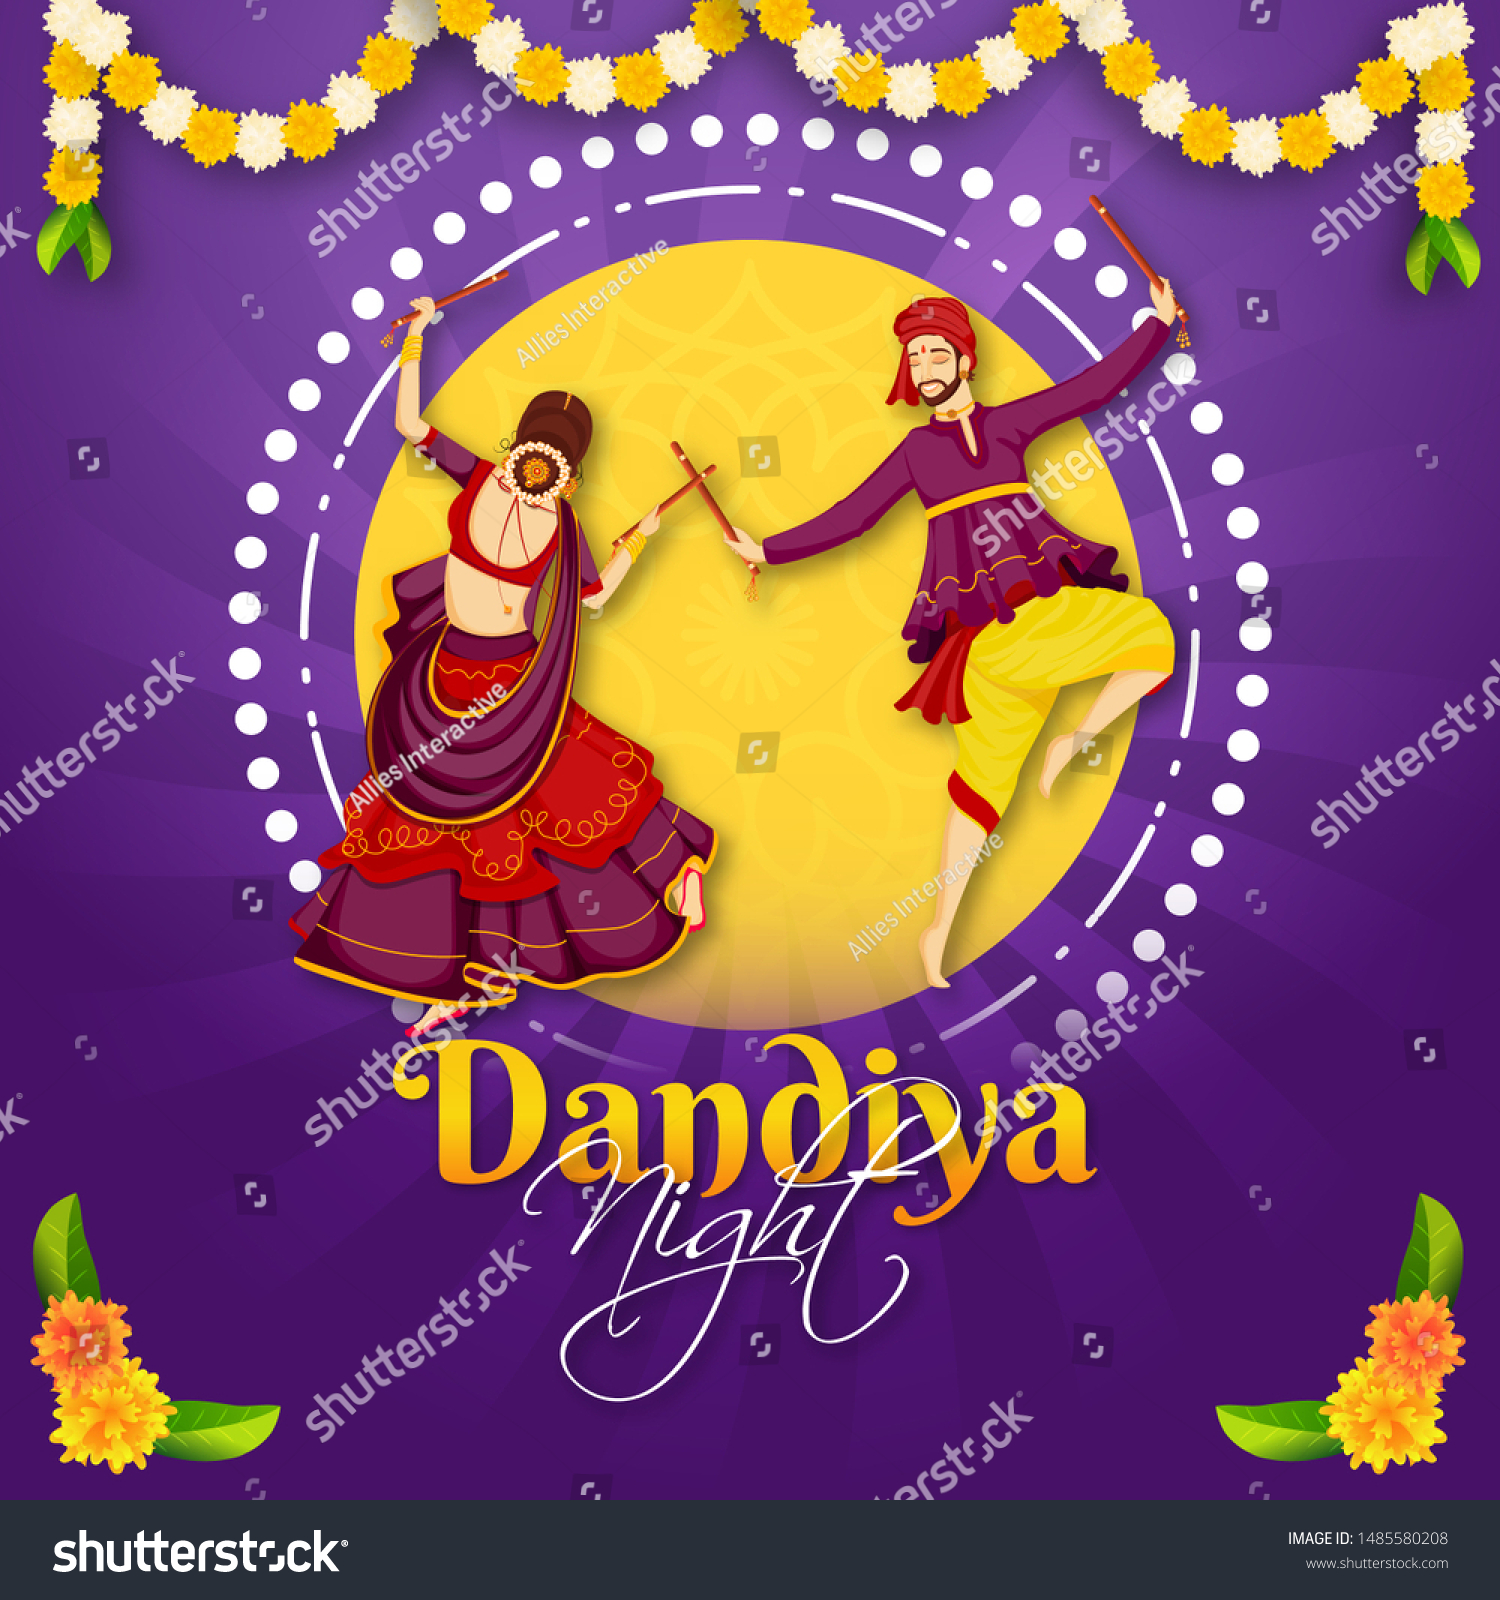 SVG of Illustration of gujarati couple performing dandiya dance on the occasion of Dandiya Night party celebration. Can be used as poster or template design. svg